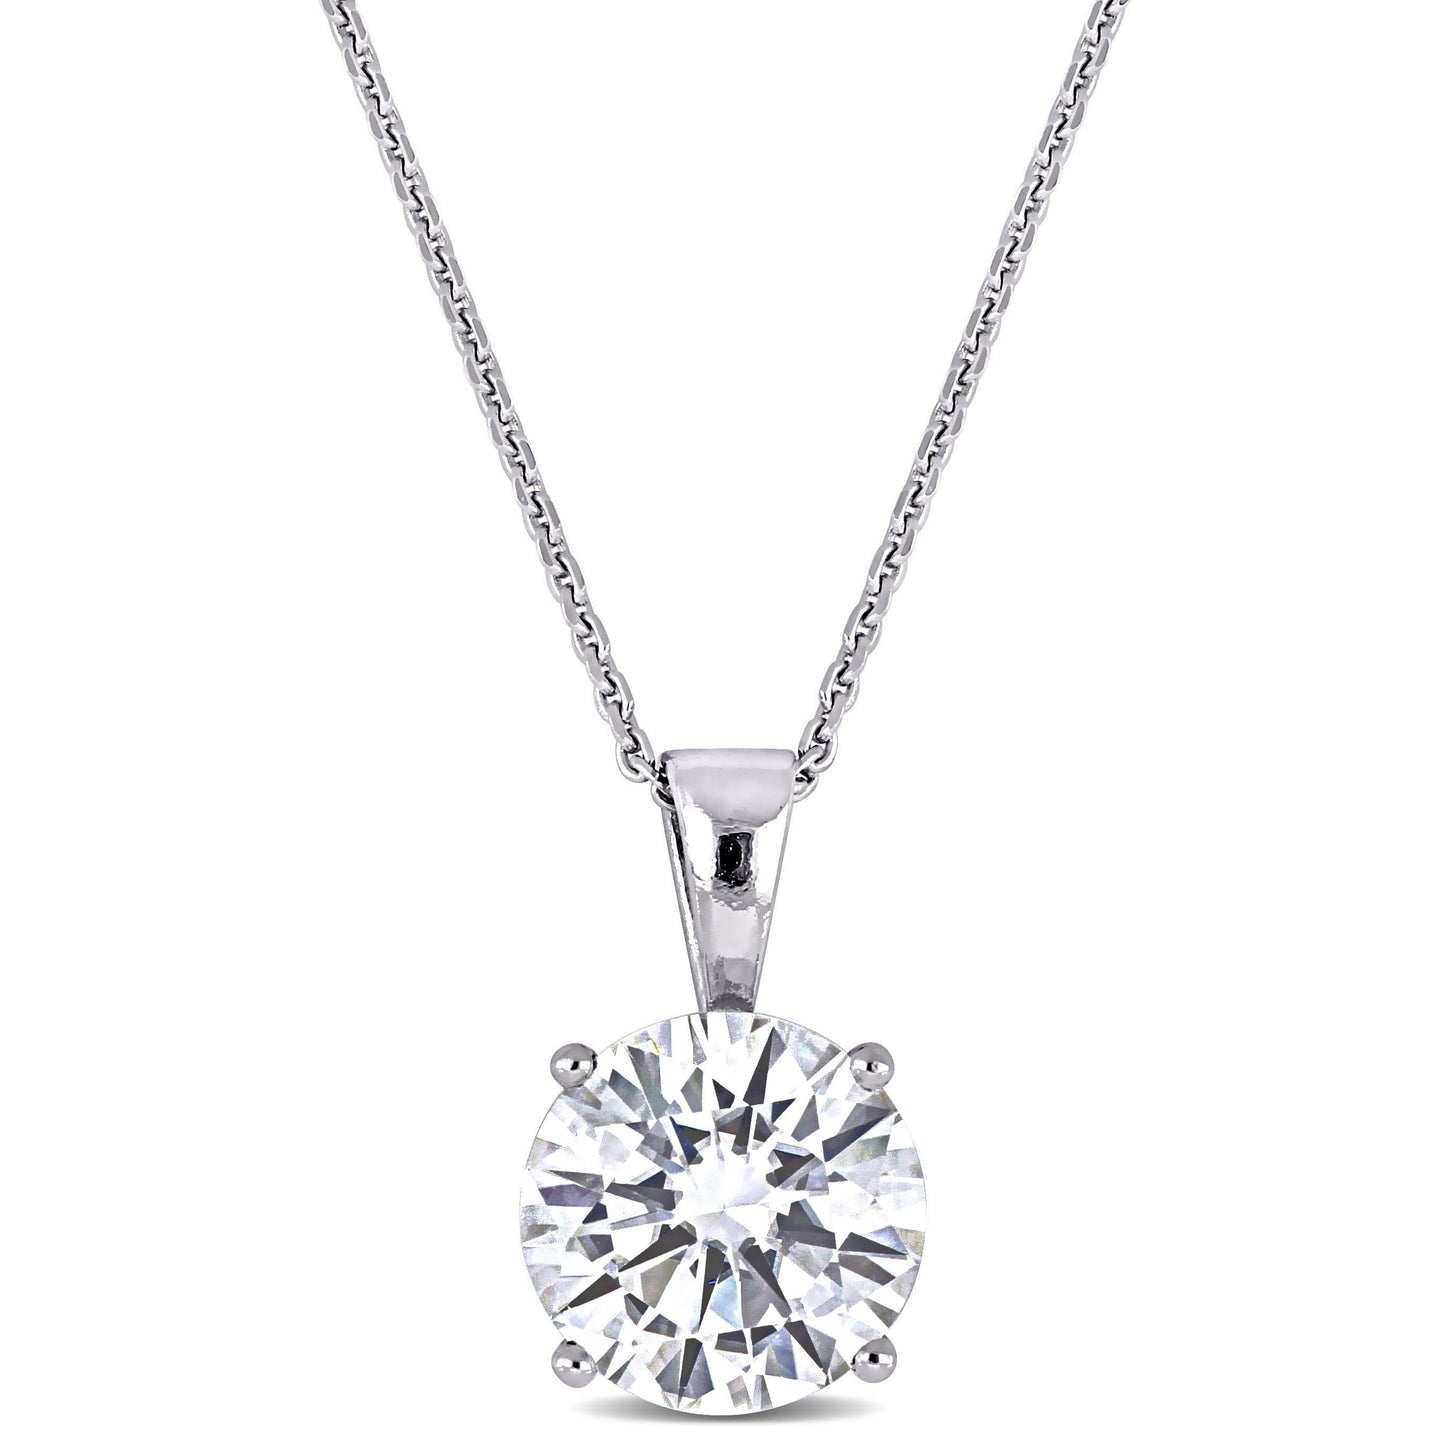 2ct Moissanite Solitaire Necklace in 14 White Gold